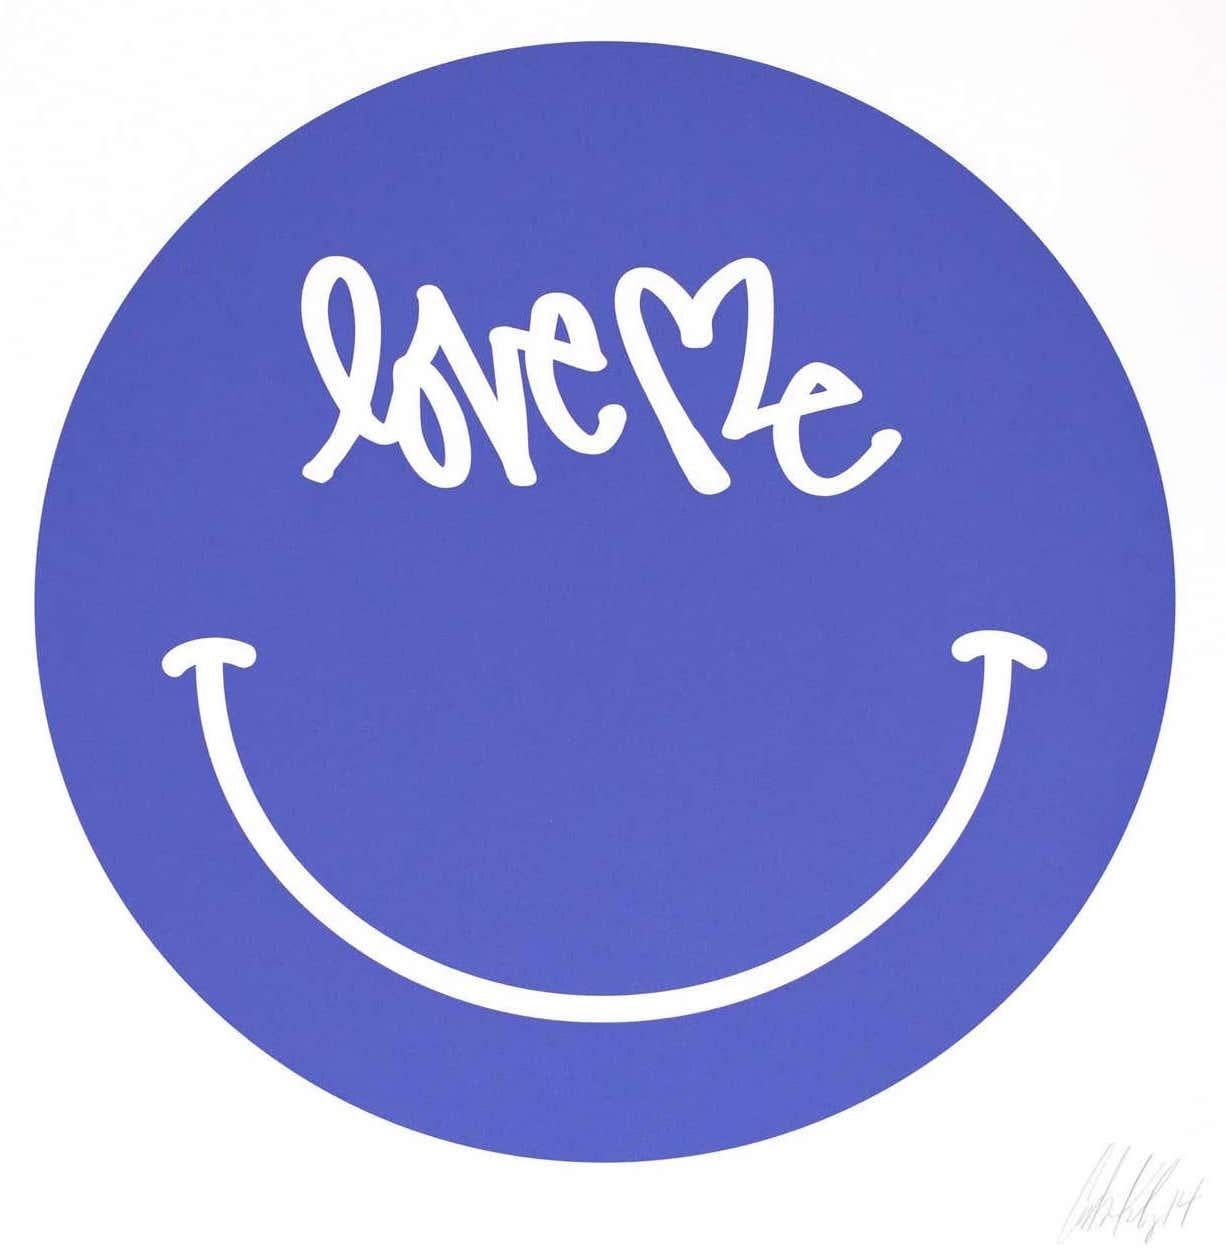 Love Me by Curtis Kulig:
Using a most universal symbol, 'The Smiley', Curtis Kulig replaces the eyes with his world renown signature mark, 'Love Me'. At 28 inches square, this hand signed print from a limited edition of 30, is the perfect piece for